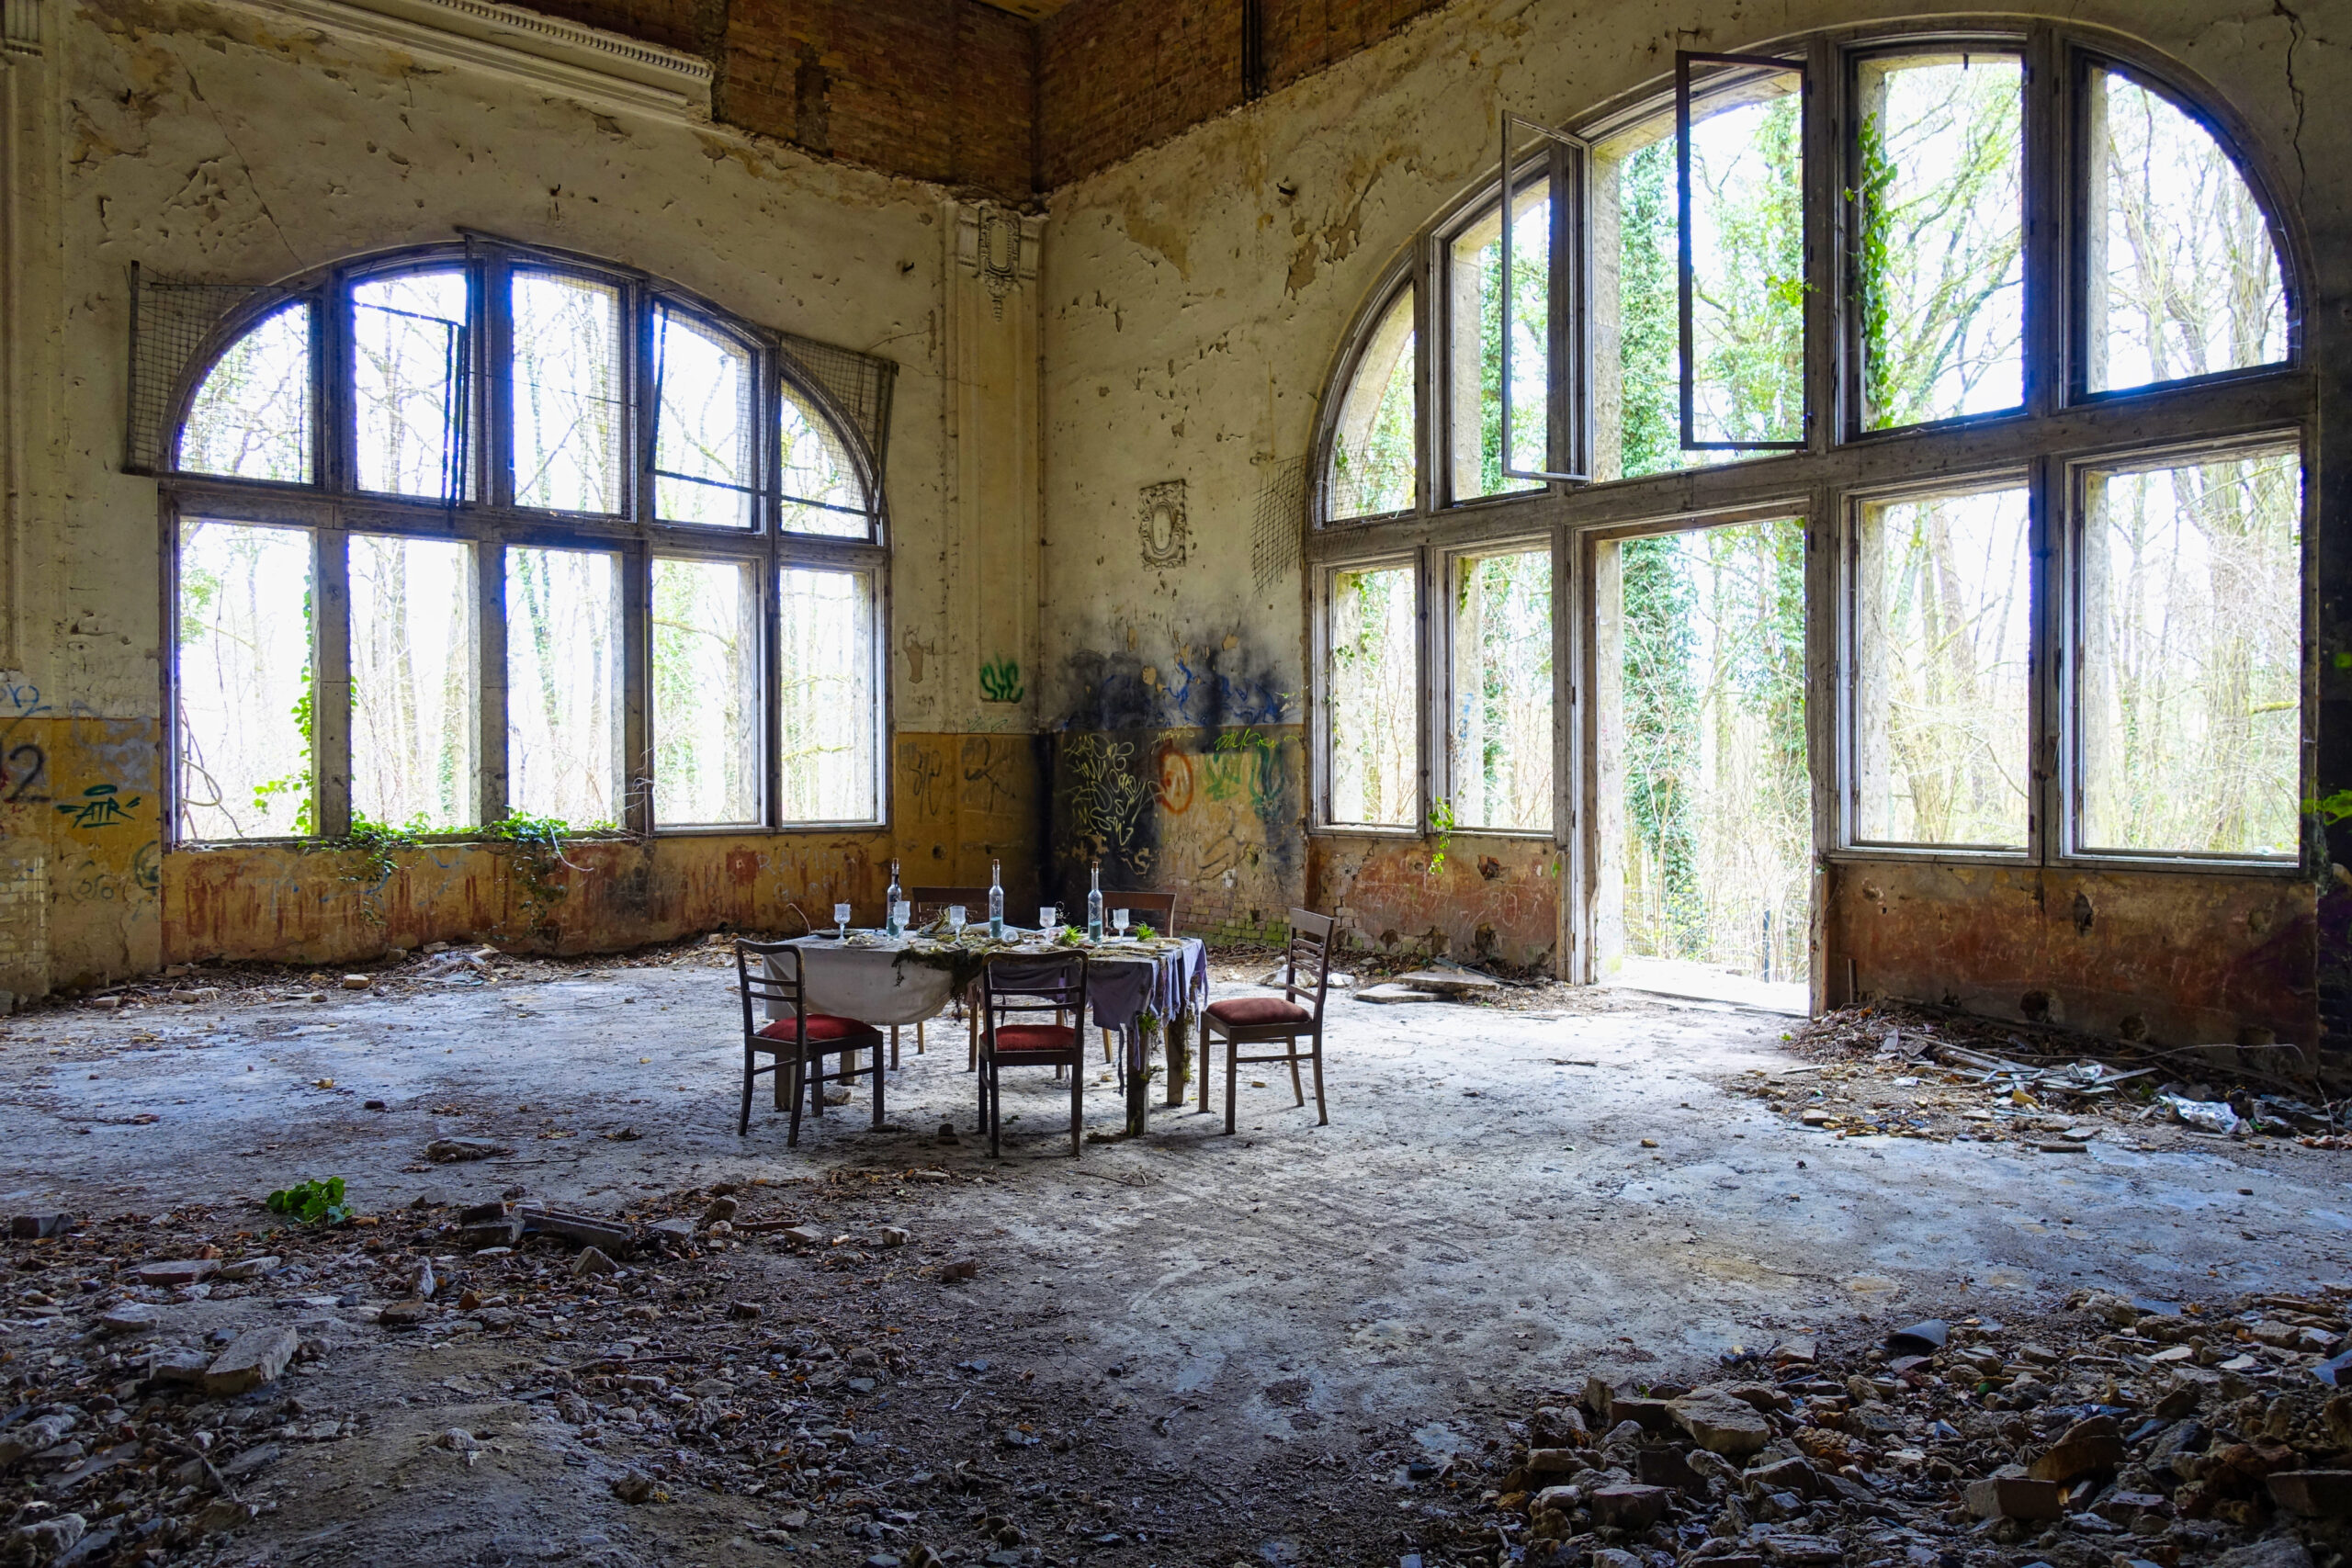 production-services-and-filming-in-berlin-dining-room-in-ruin